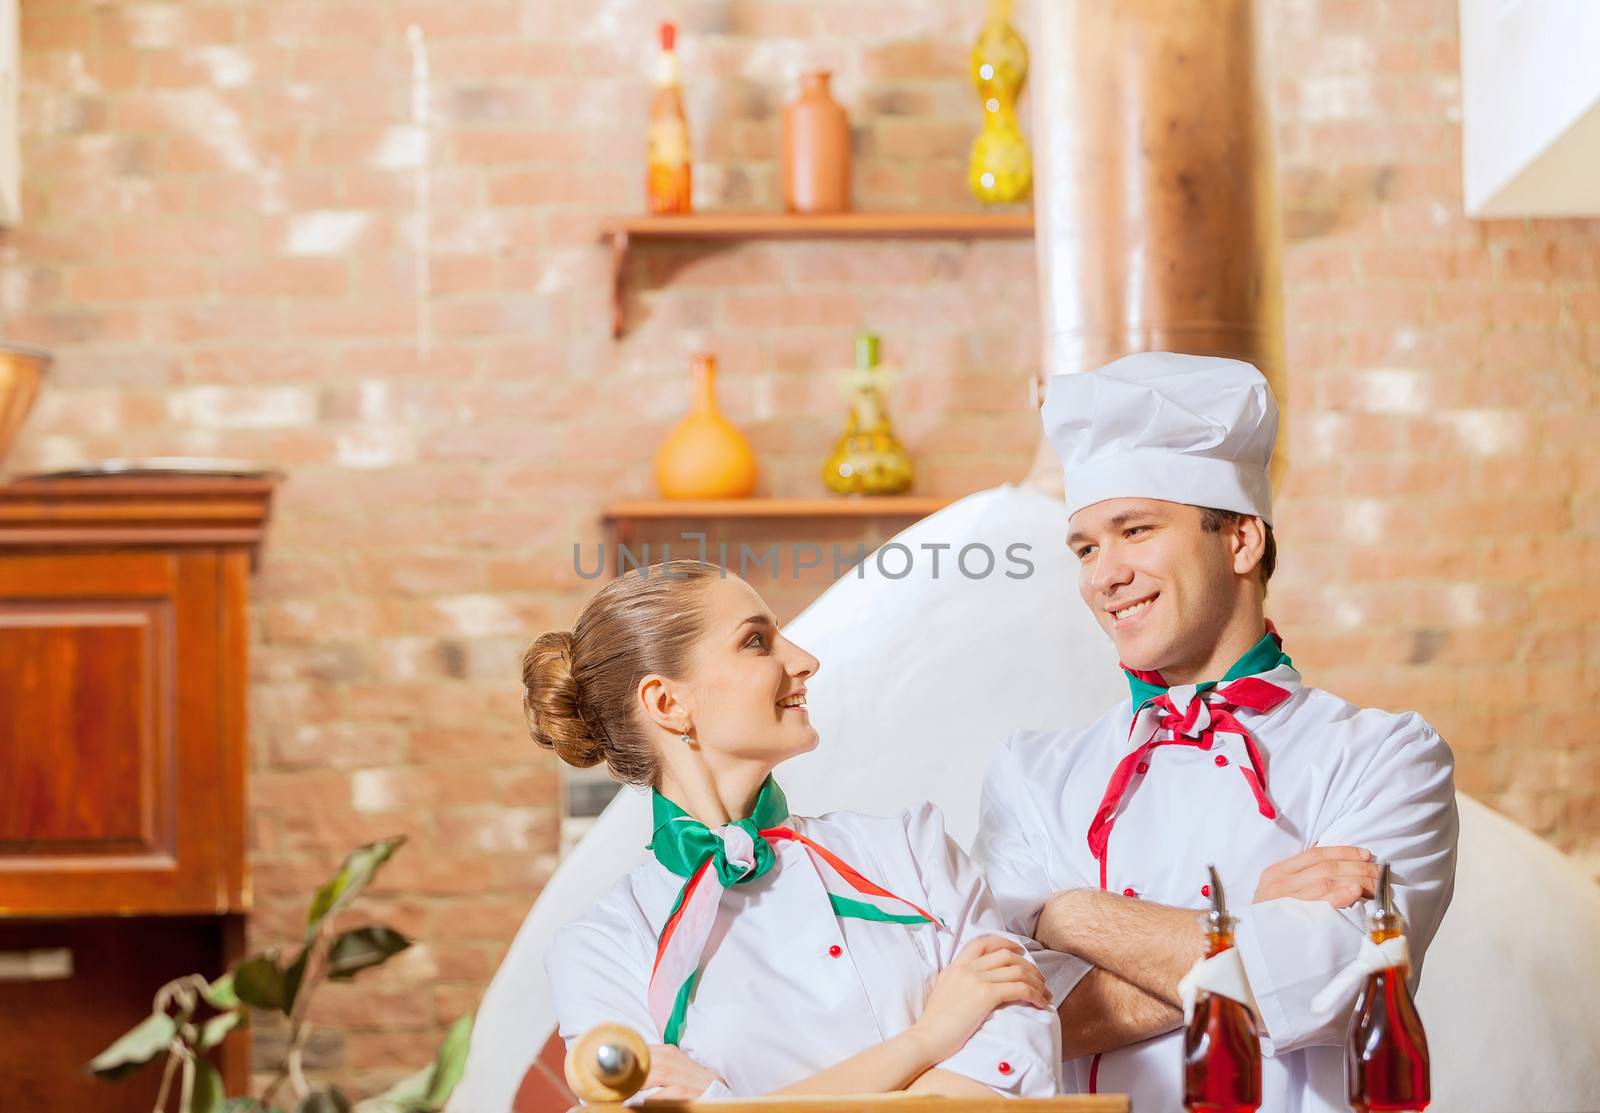 Portrait of two cooks with crossed arms looking at the camera